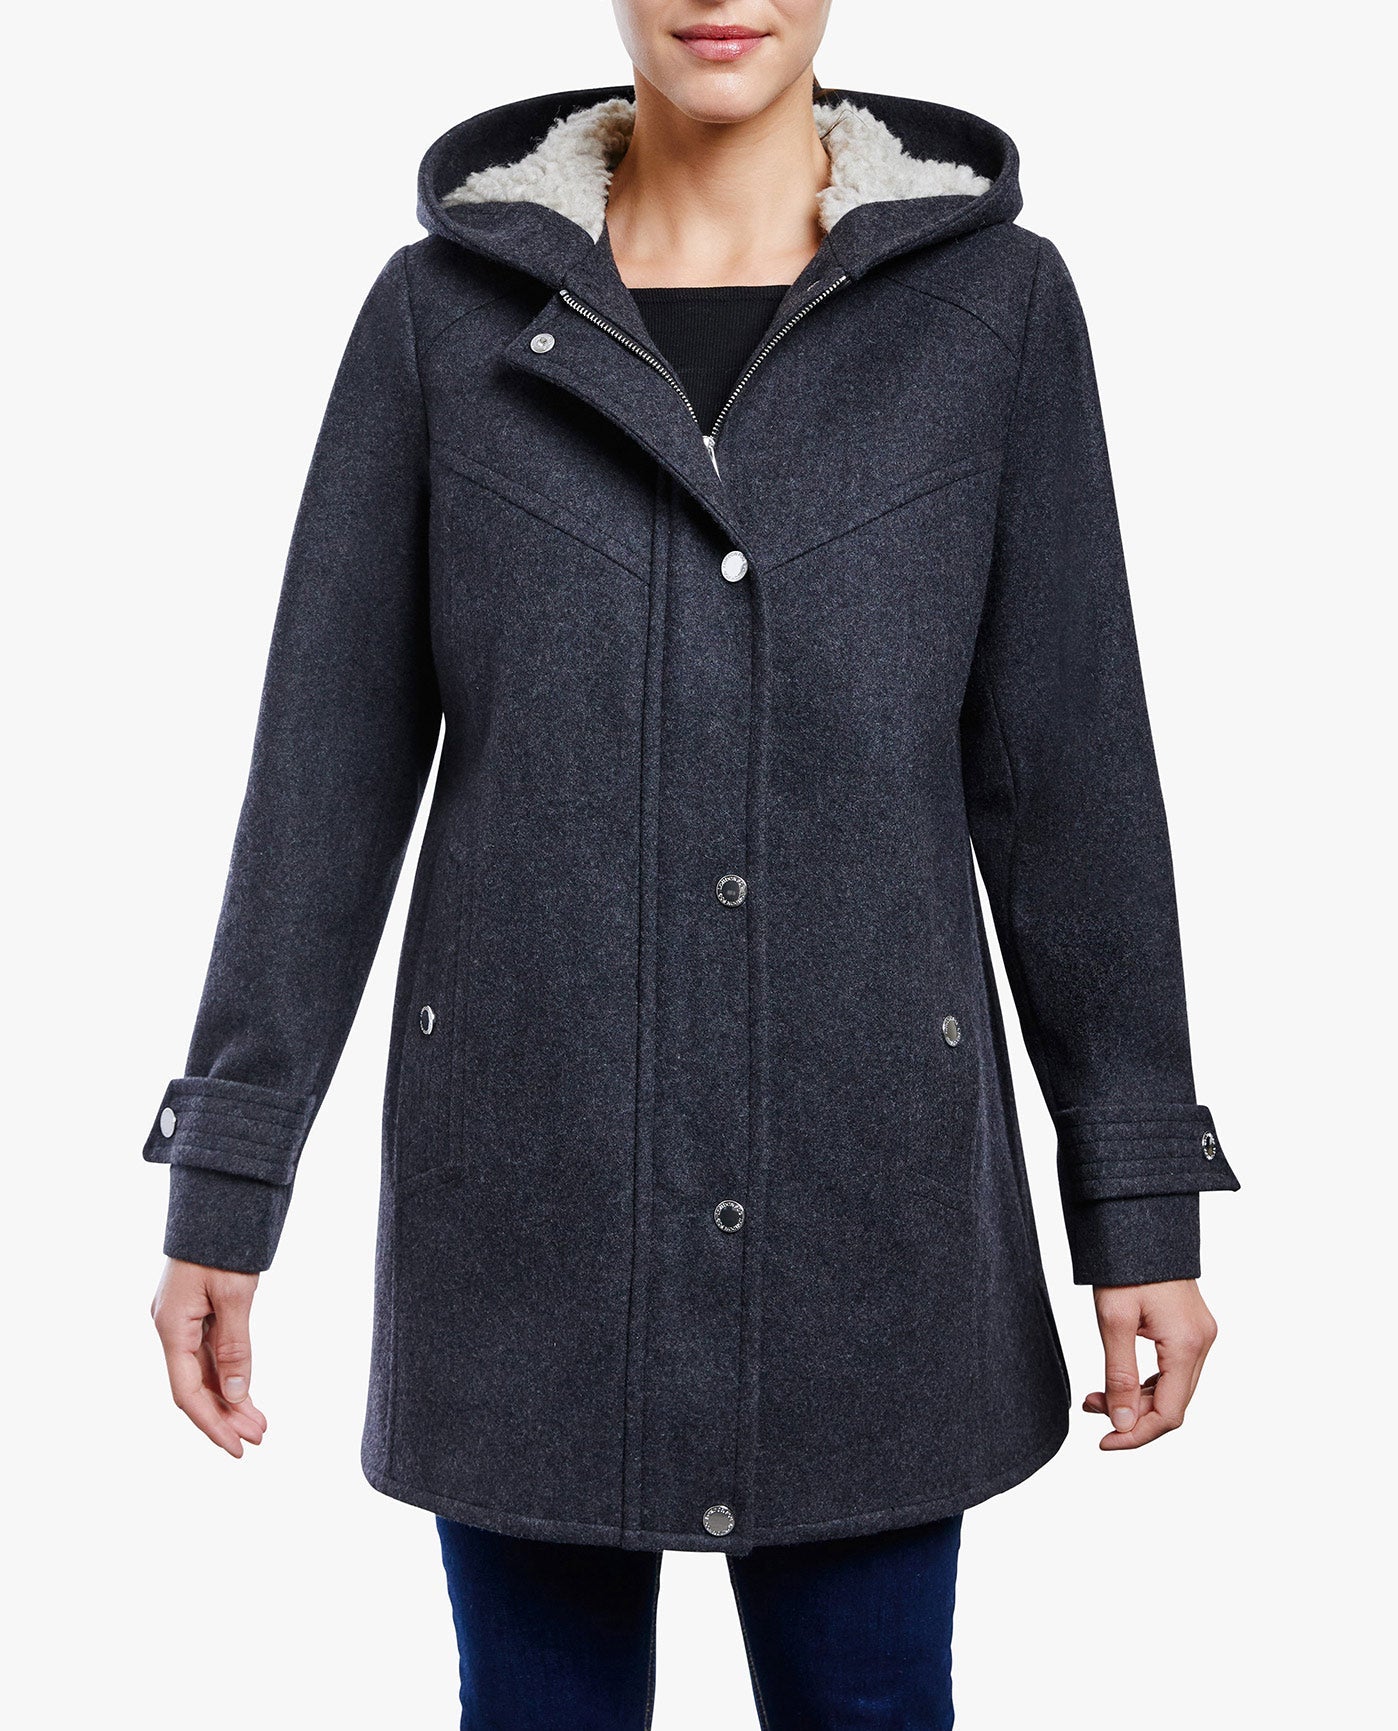 Front View Of ZIP-FRONT SHERPA LINED HOOD 31 INCH WOOL JACKET | CHARCOAL